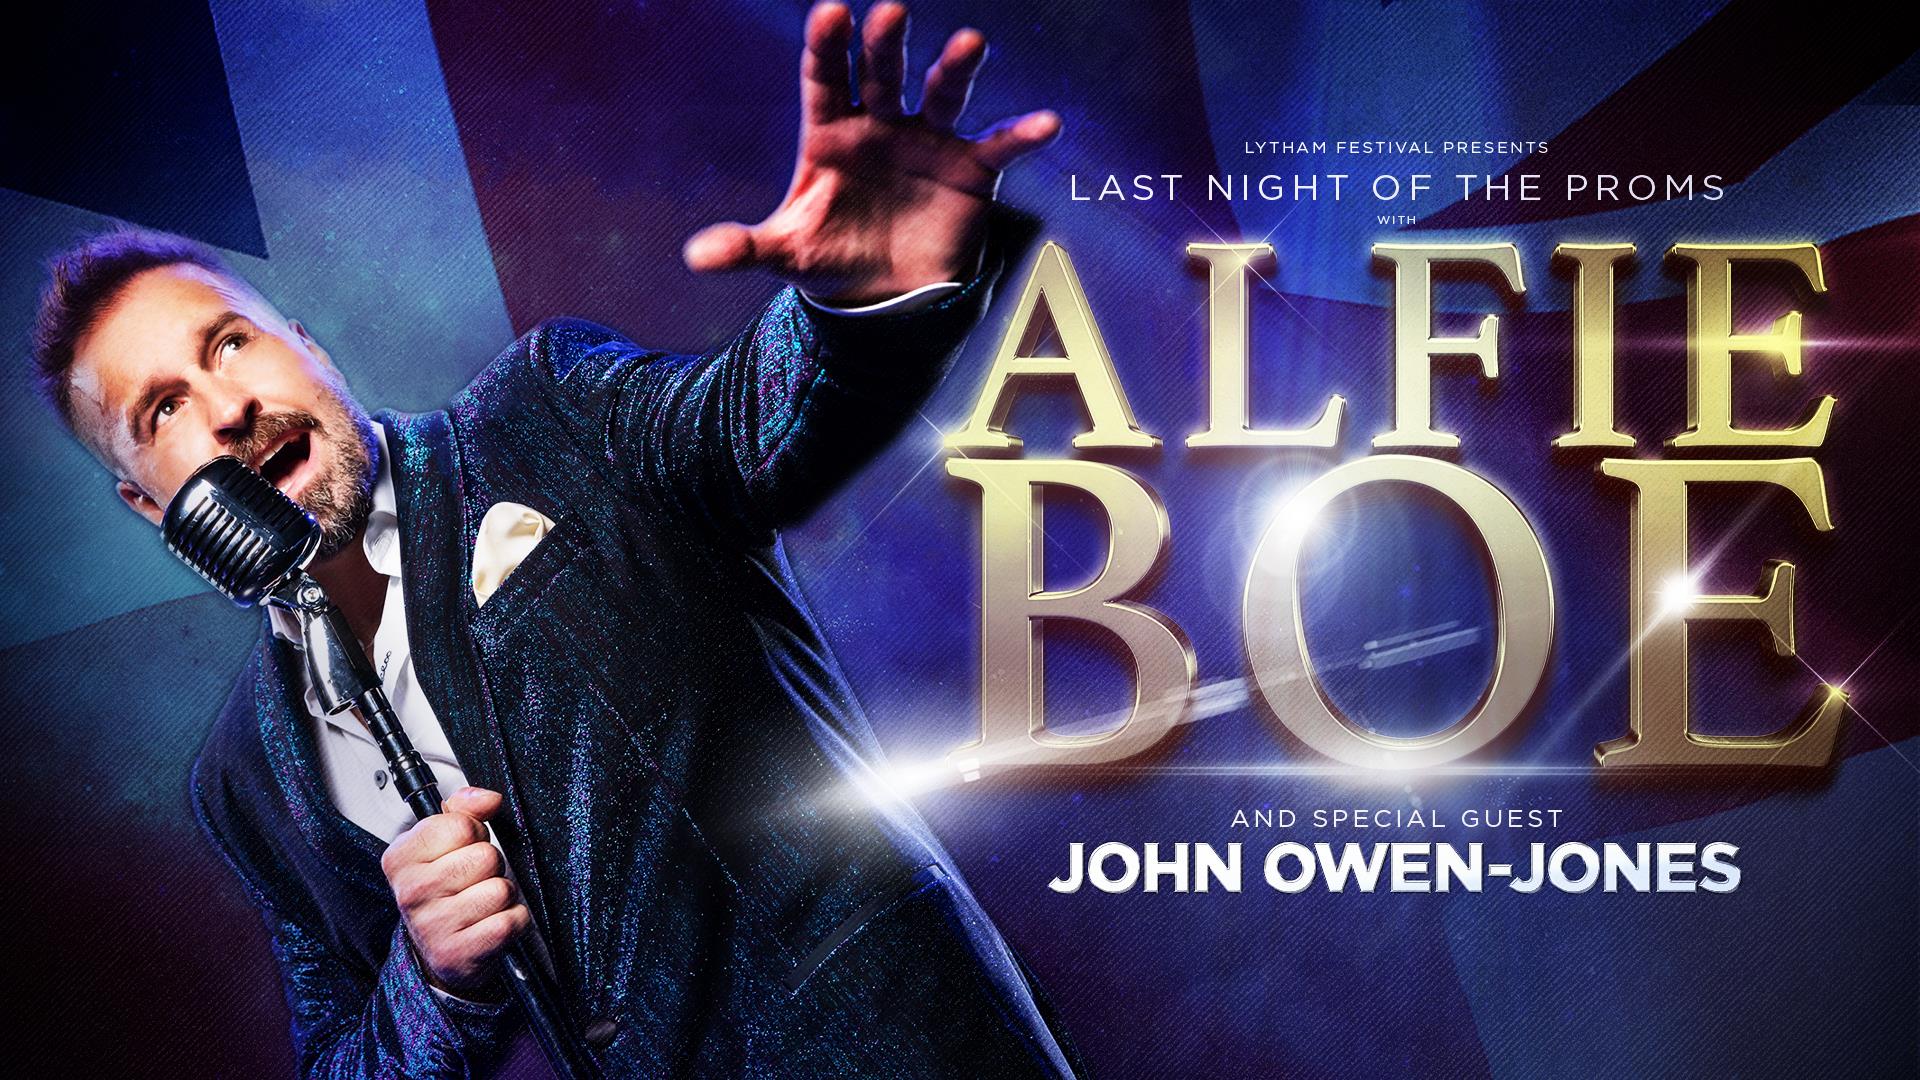 Alfie Boe – Last Night of the Proms with special guest John Owen-Jones - Lowther Pavilion